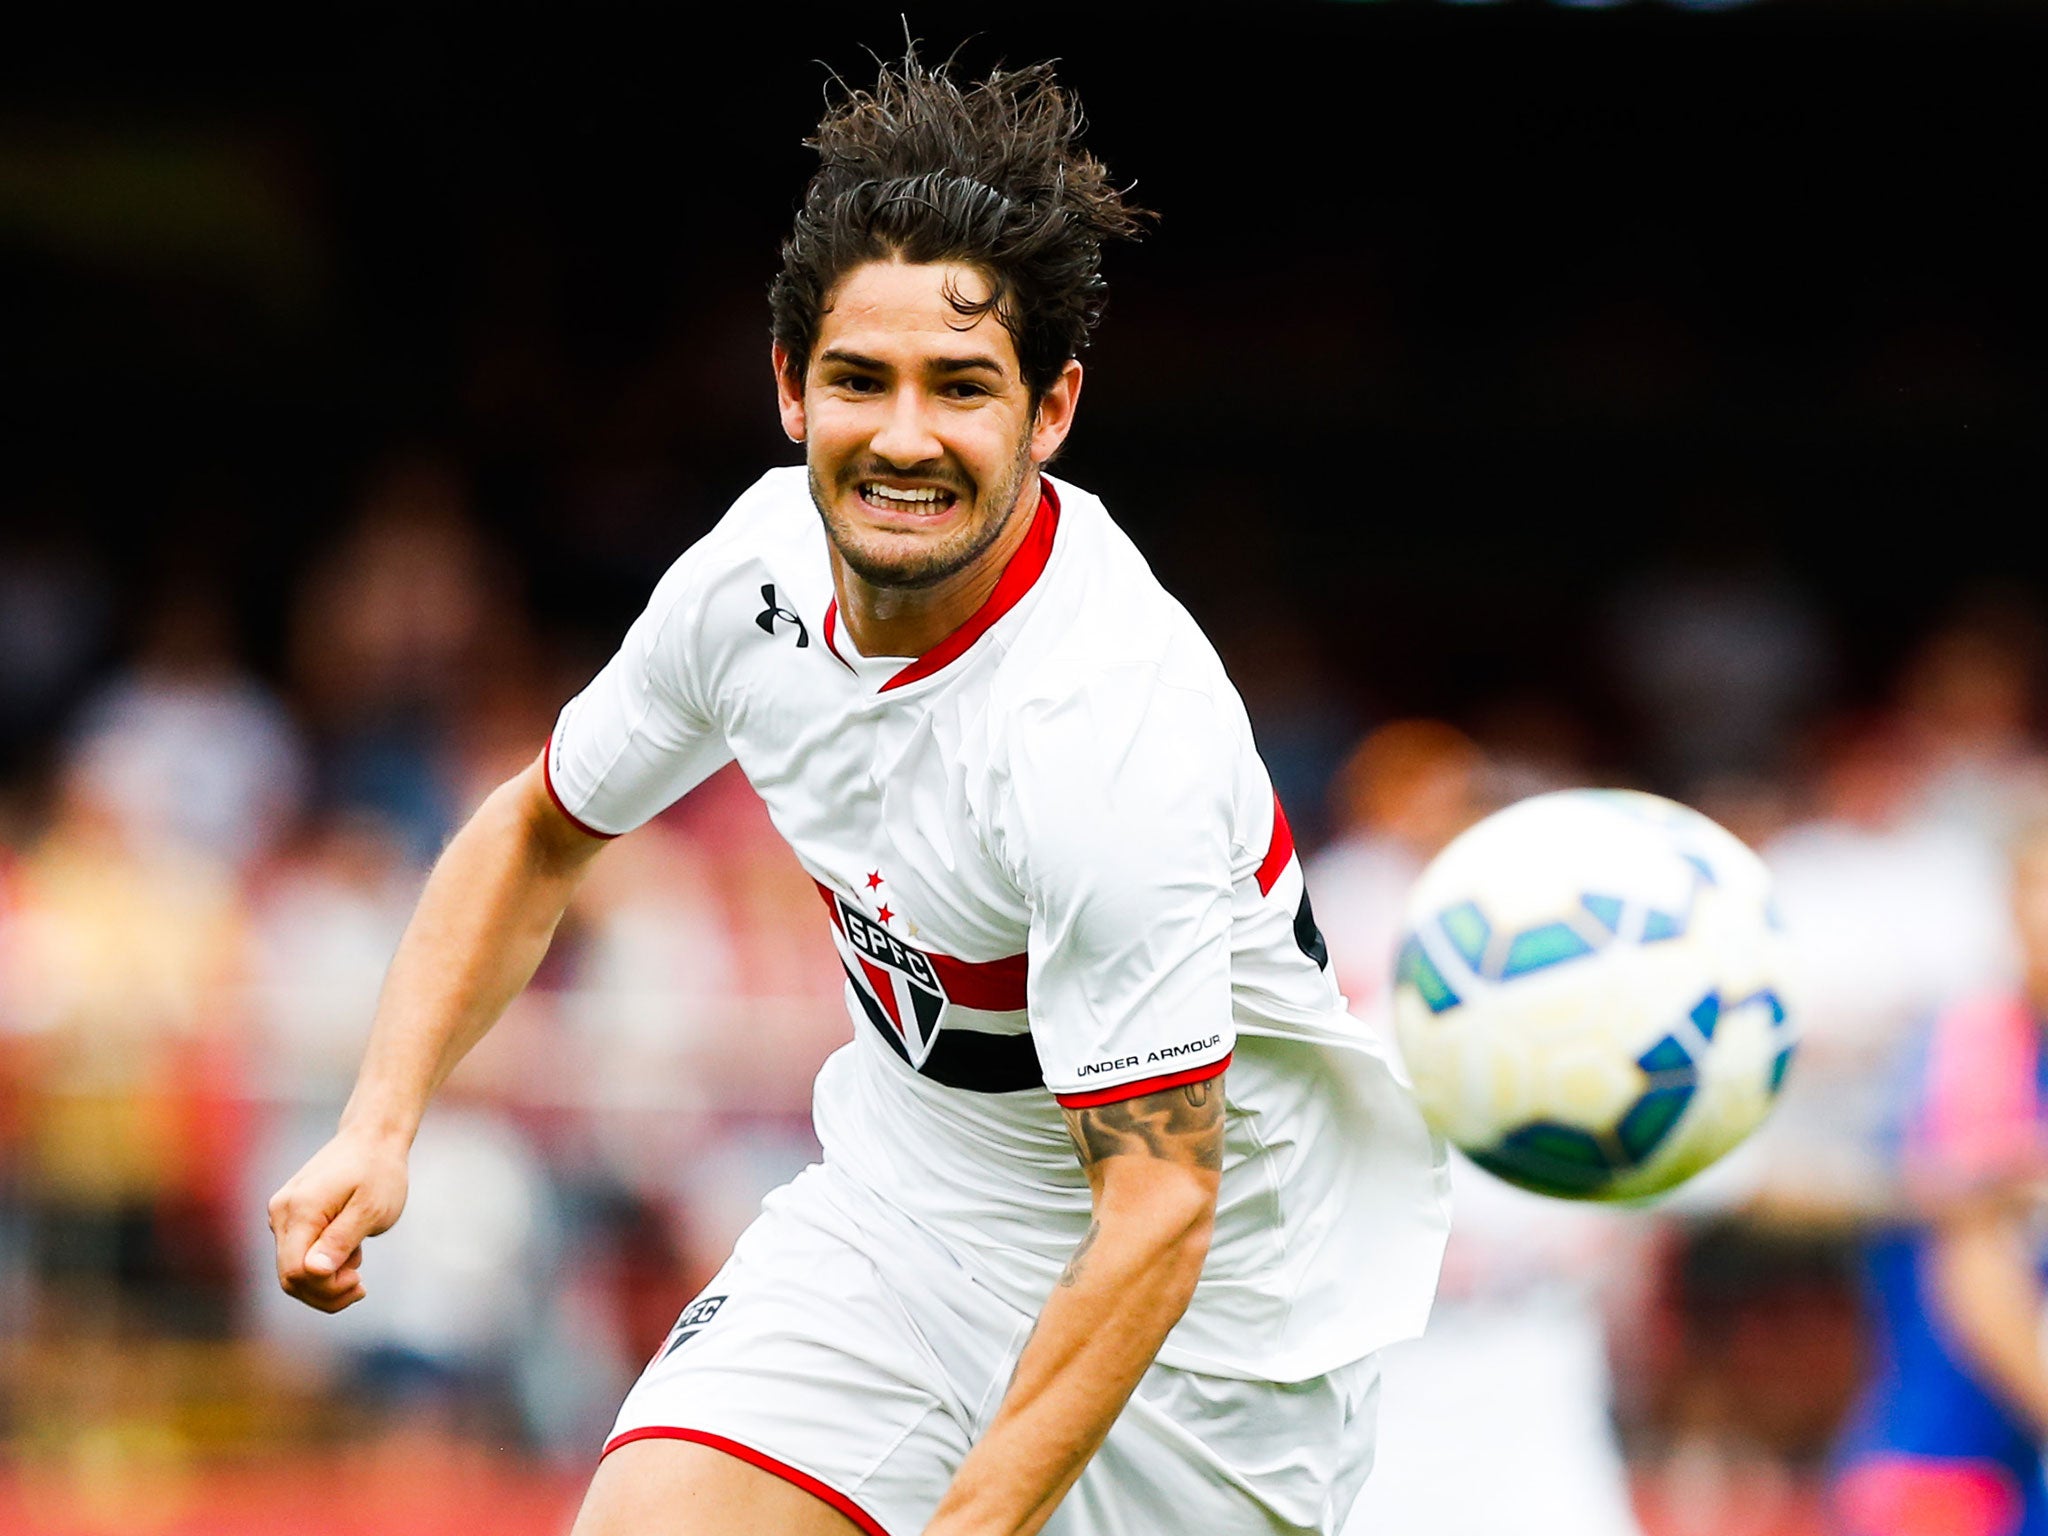 Is Alexandre Pato on his way to Anfield?